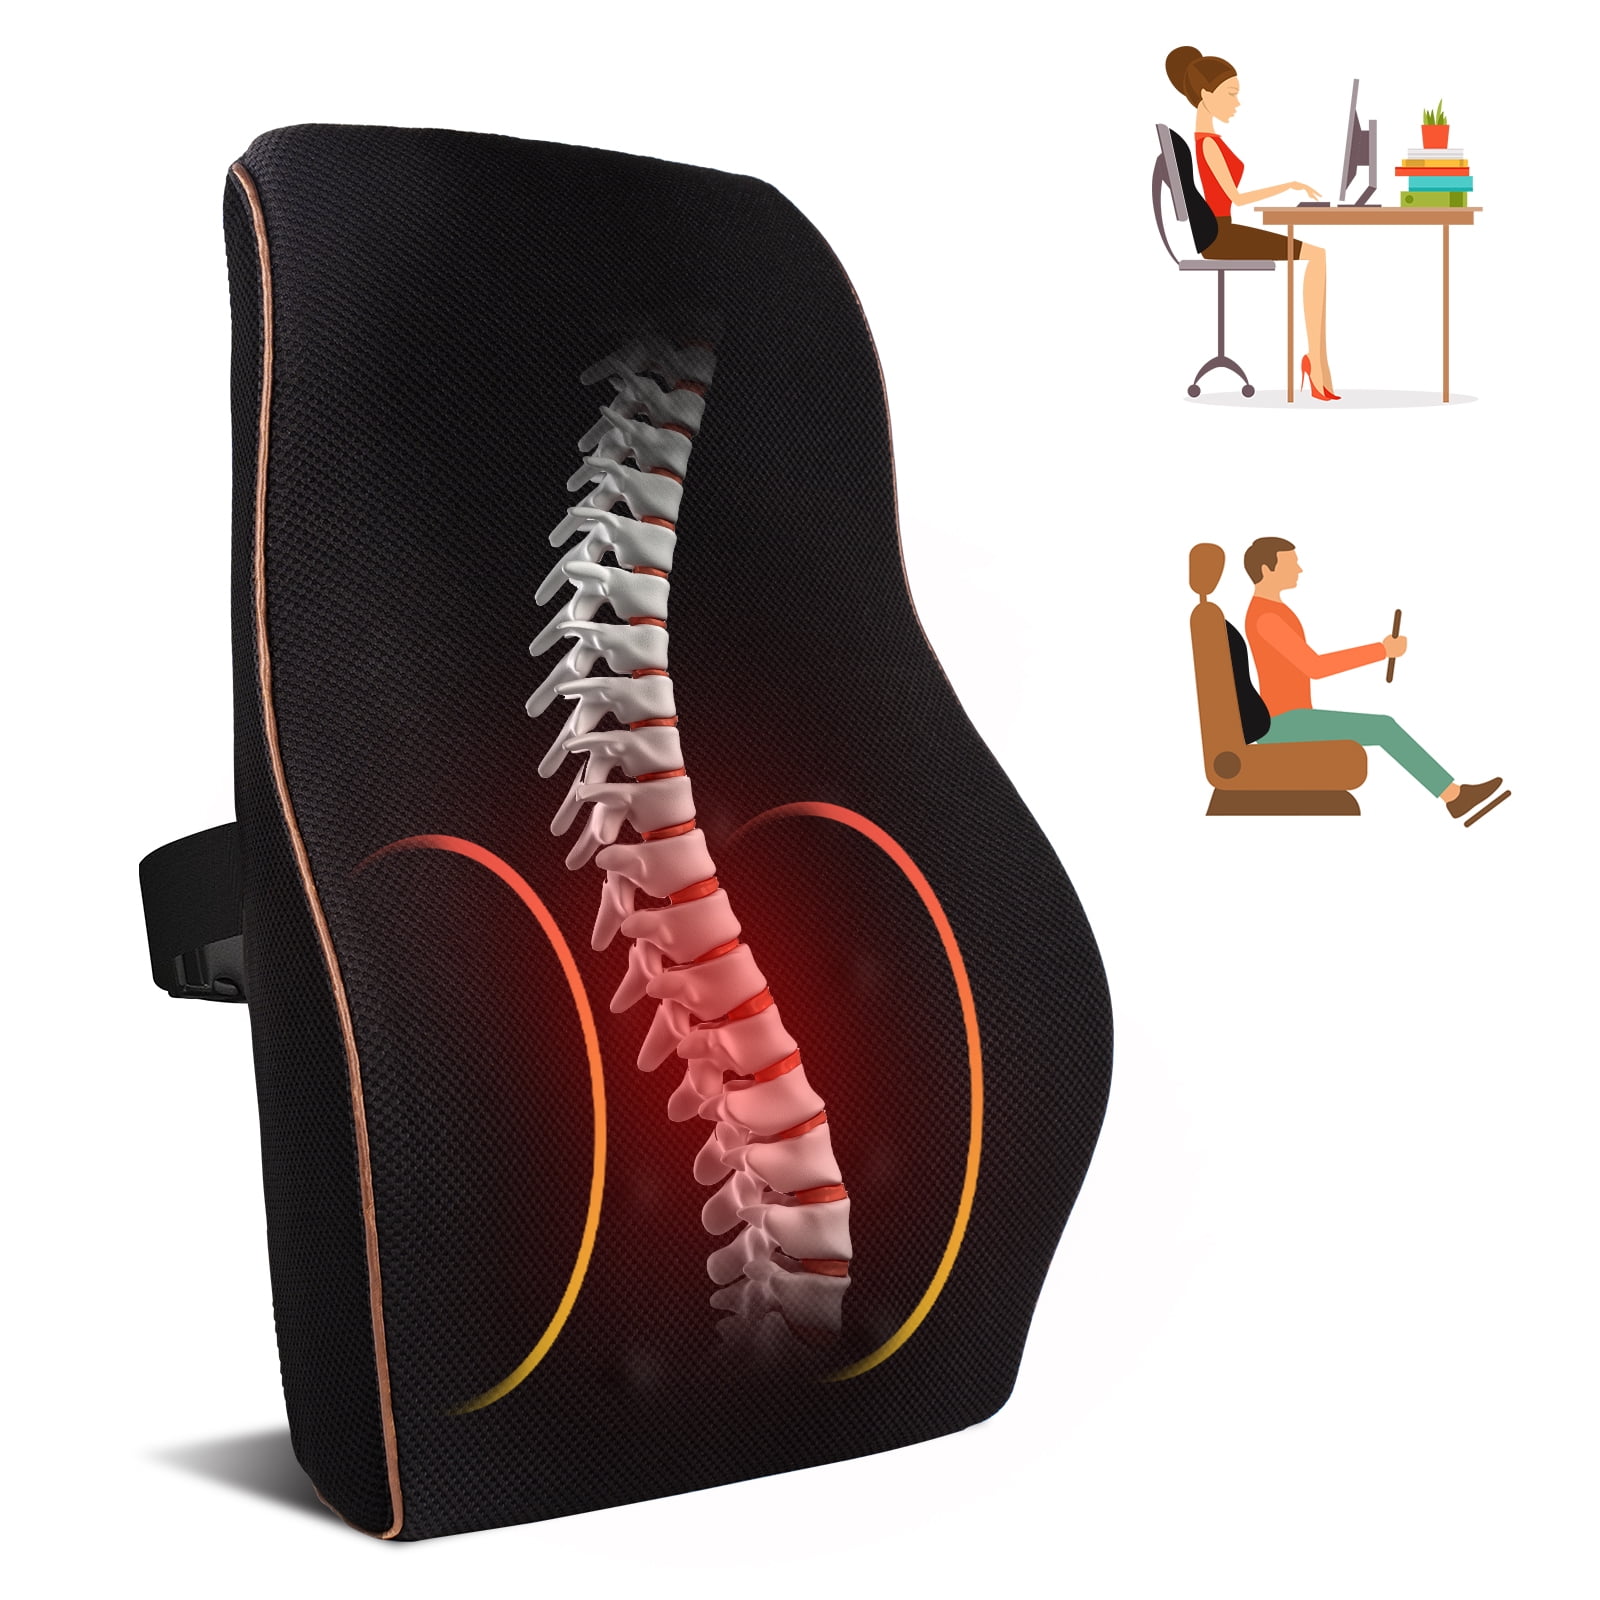 kasney Lumbar Support Pillow - Neo Cushion for Low Back Pain Relief - Versatile Use Lumbar Support Cushion for Office Chair, GAM